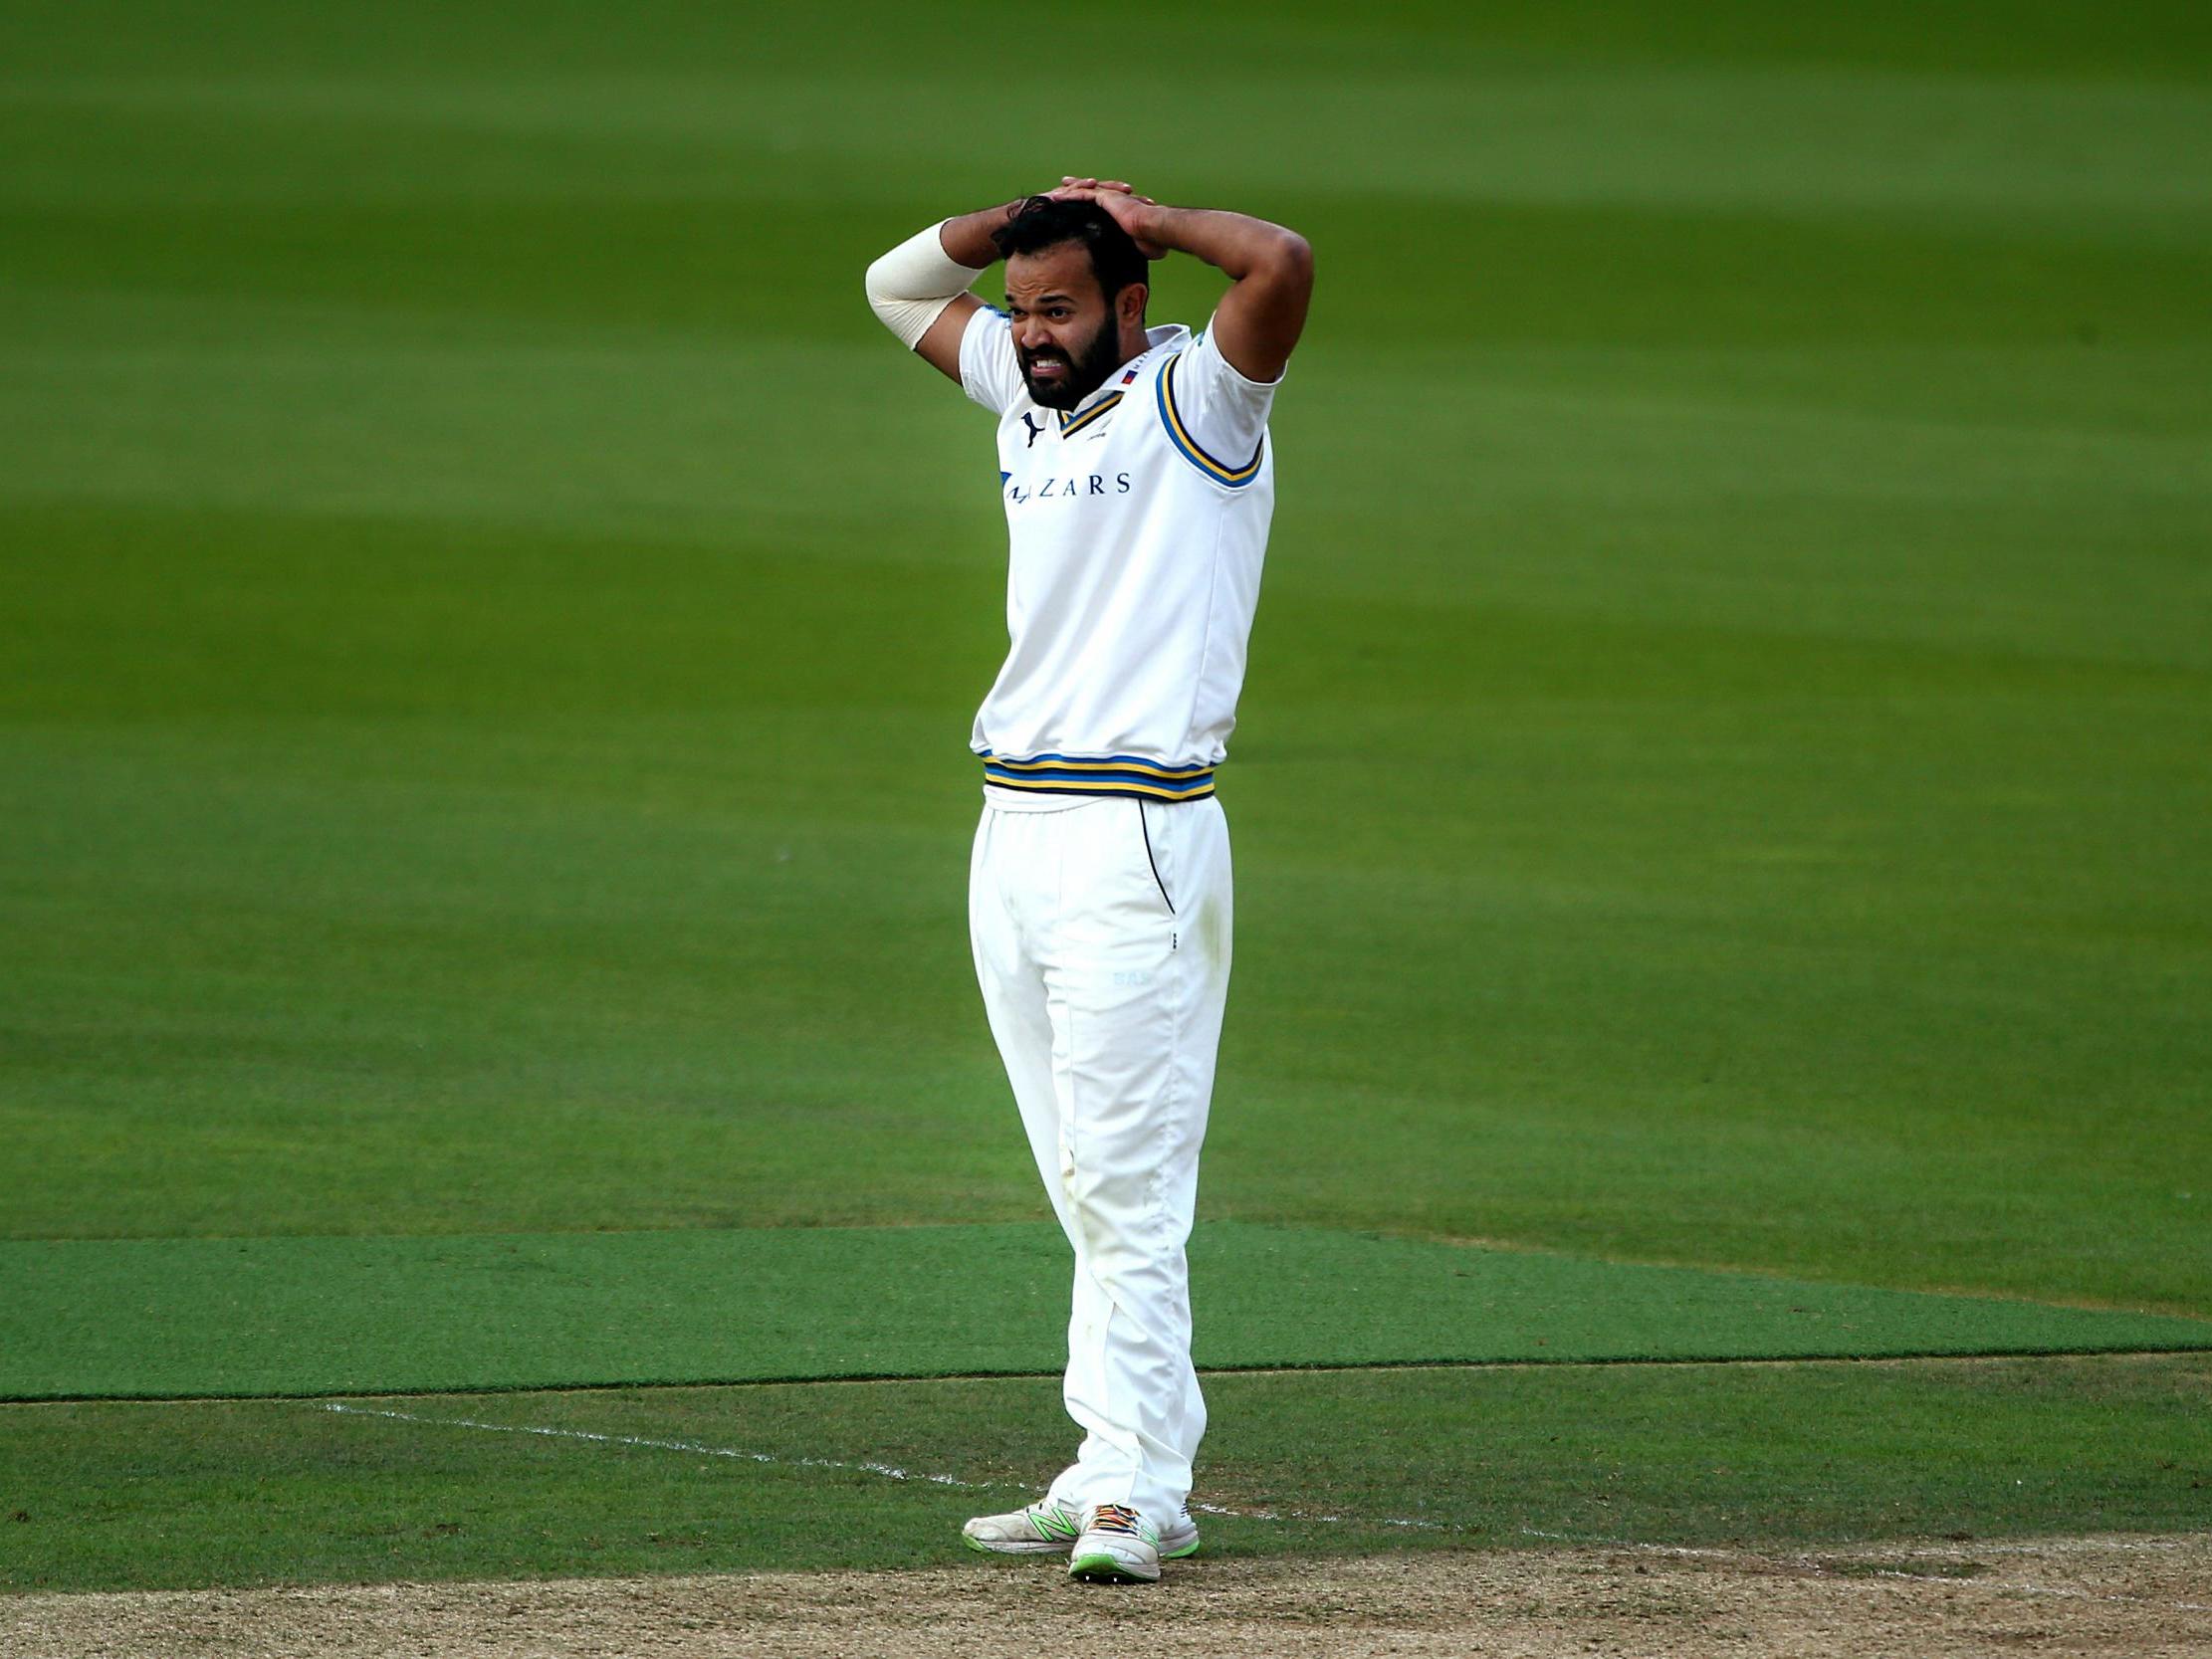 Azeem Rafiq quit cricket after suffering from alleged racism during his time at Yorkshire